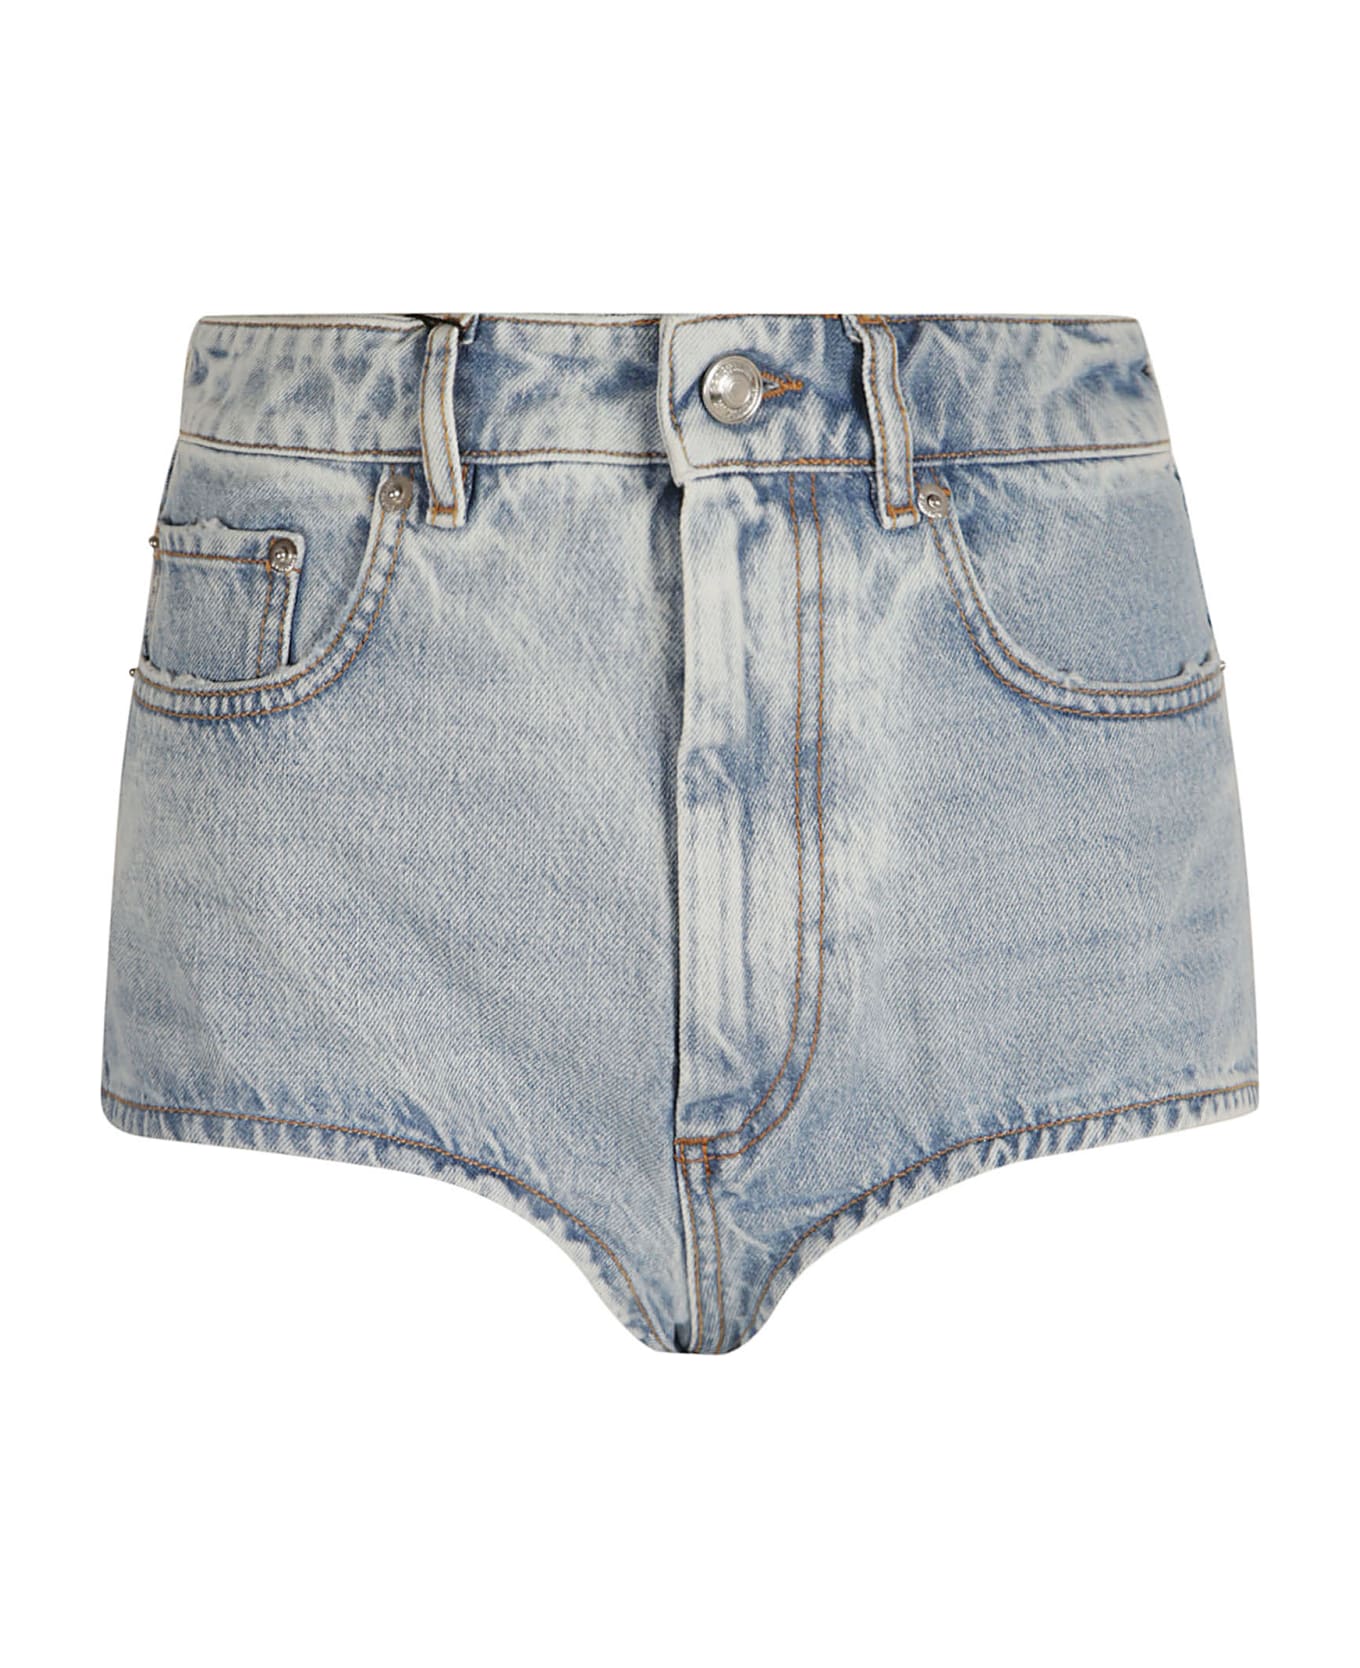 SportMax Chicca Jeans Shorts - Midnight Blue